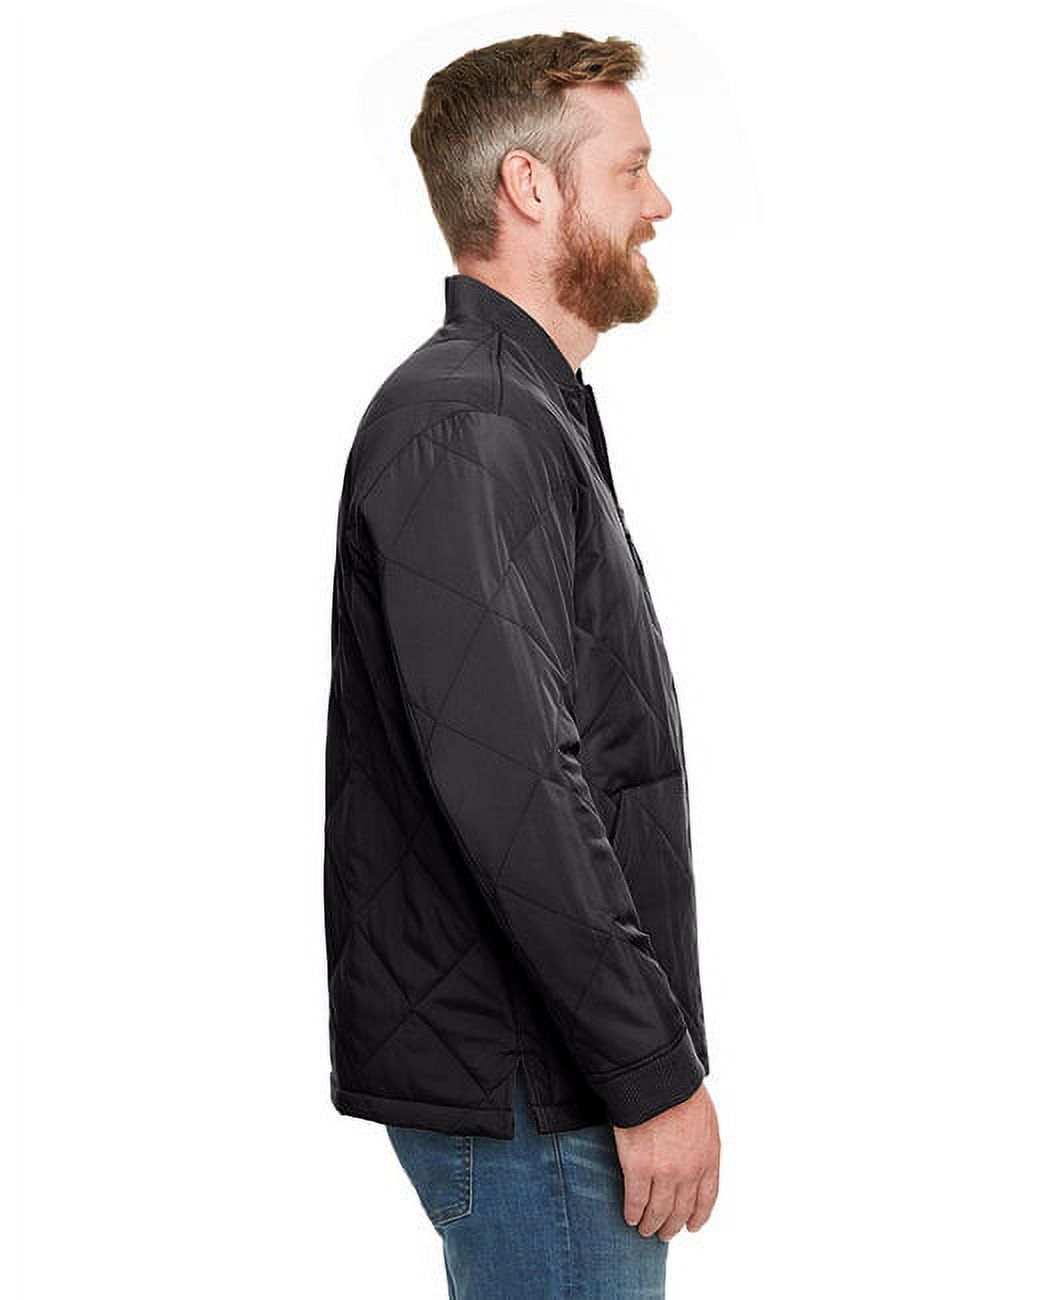 Adult Dockside Insulated Utility Jacket - DARK CHARCOAL - M - image 3 of 3